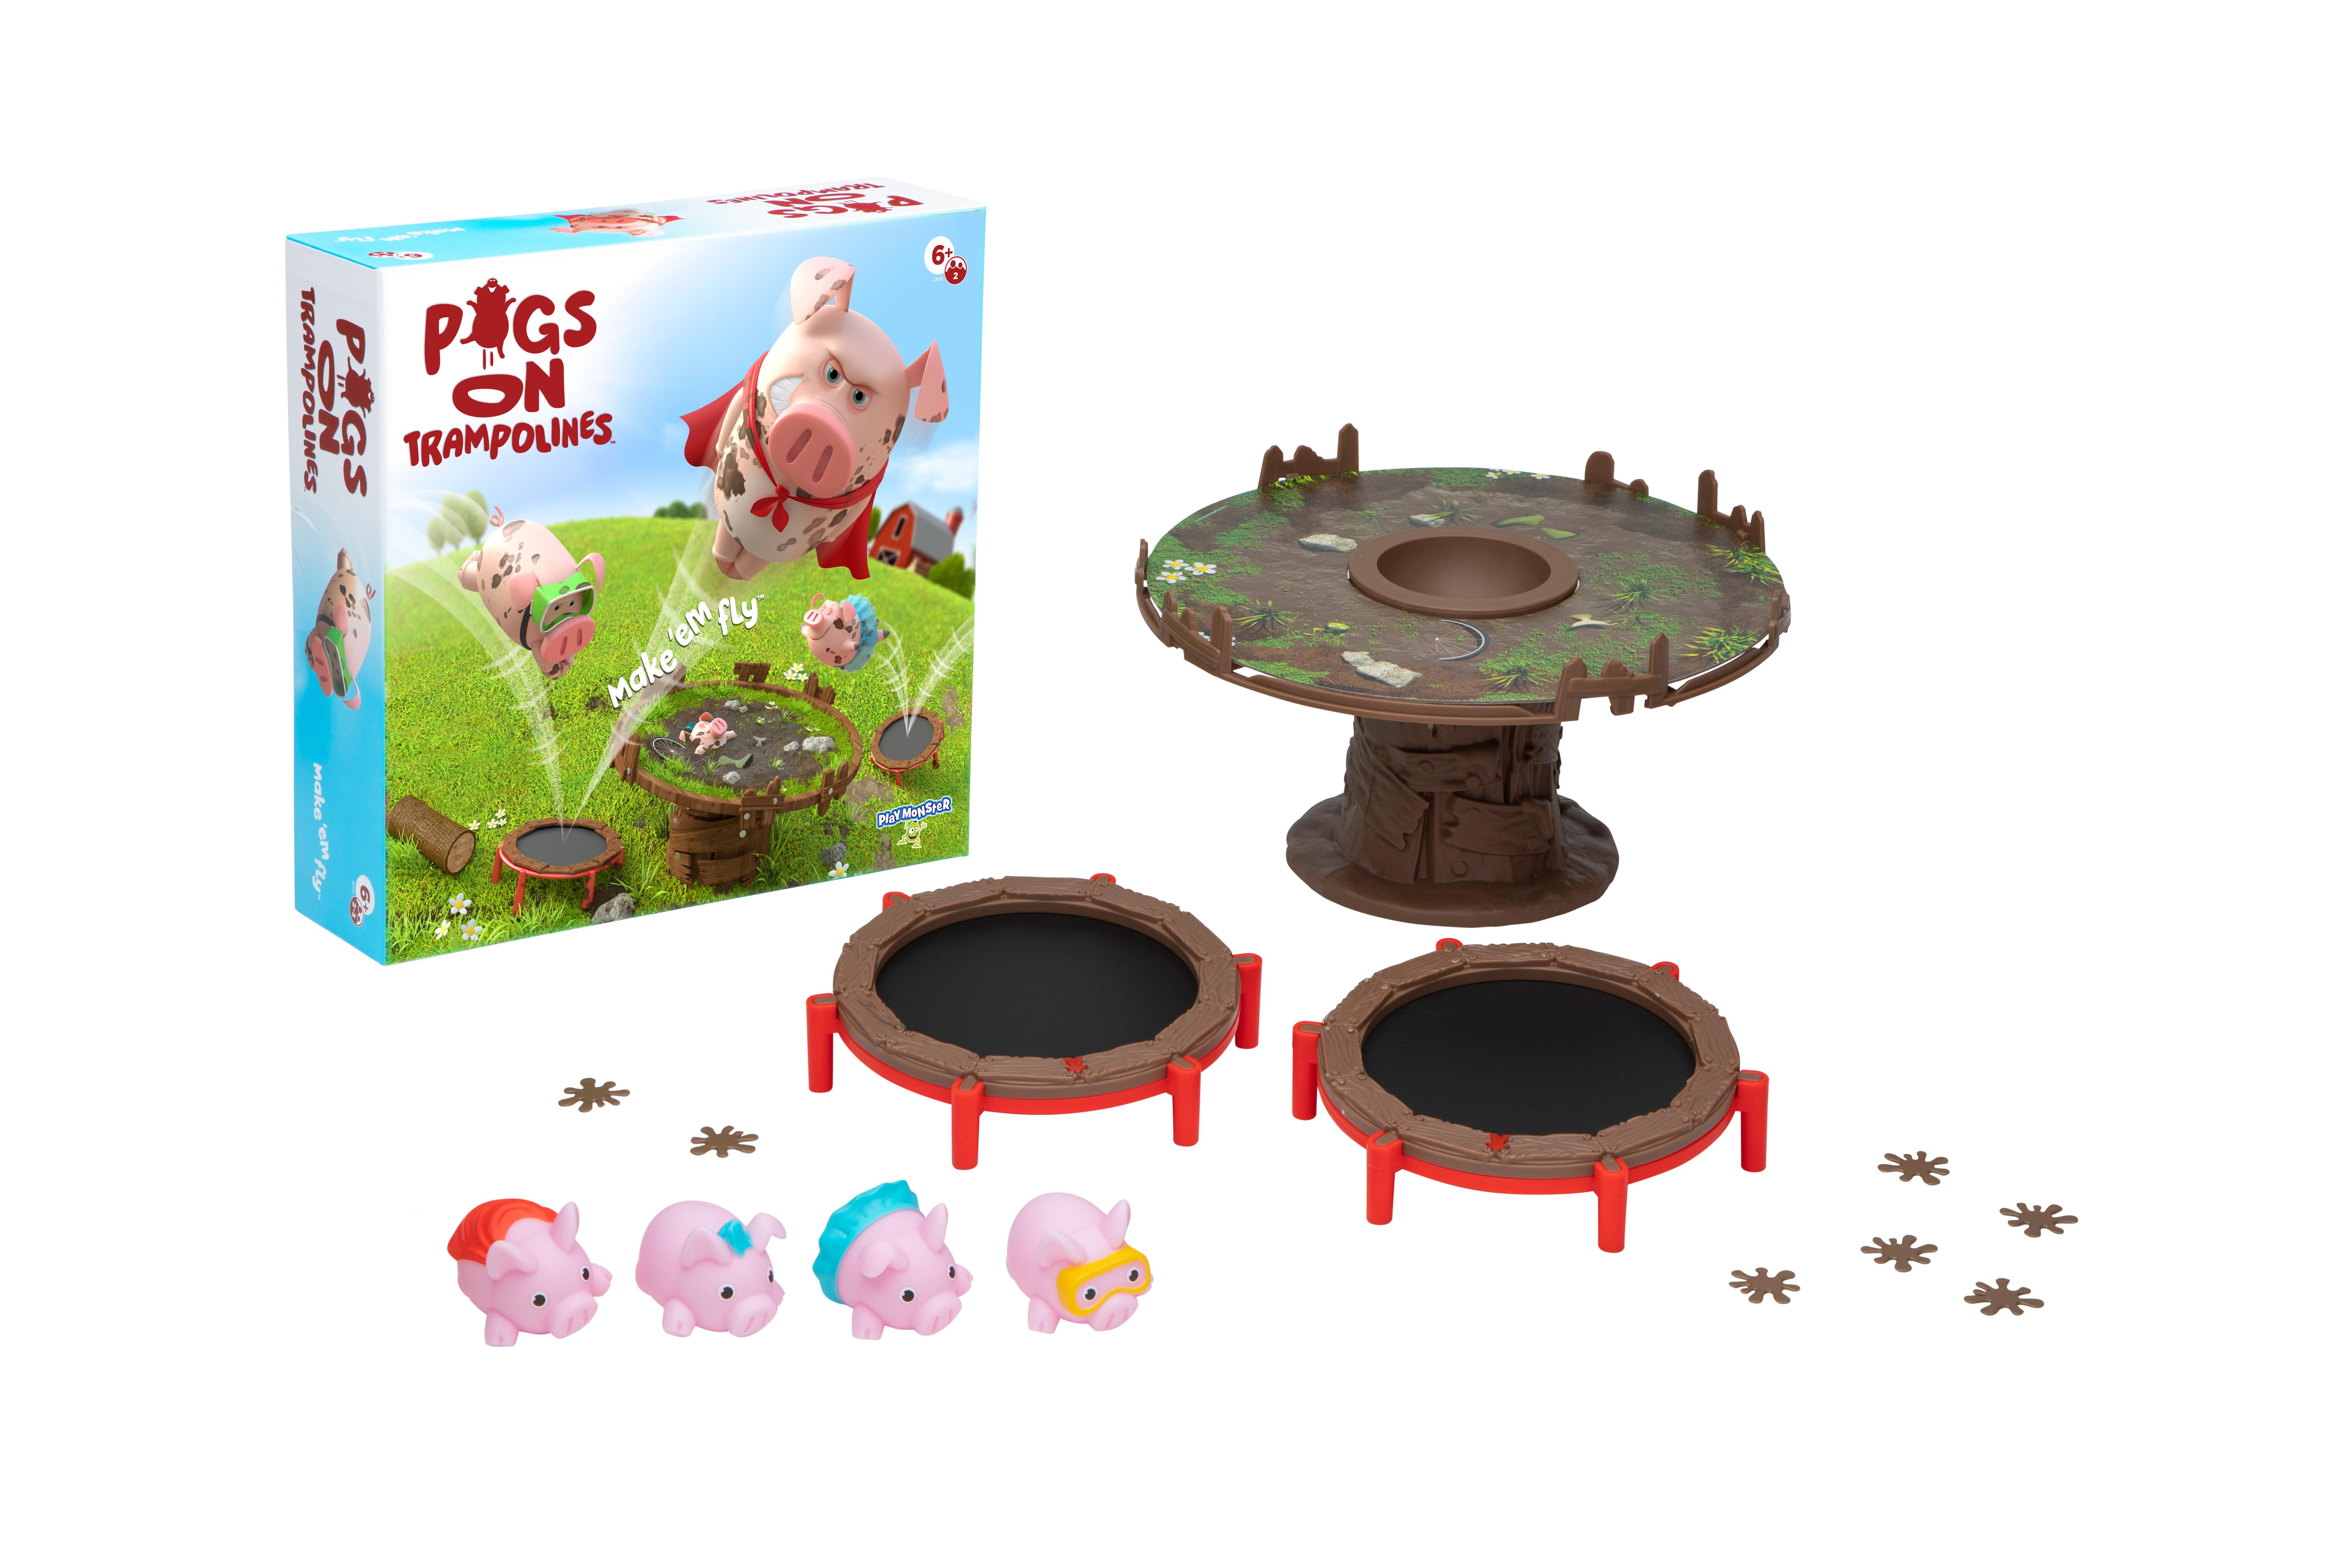 Games – Pigs on Trampolines